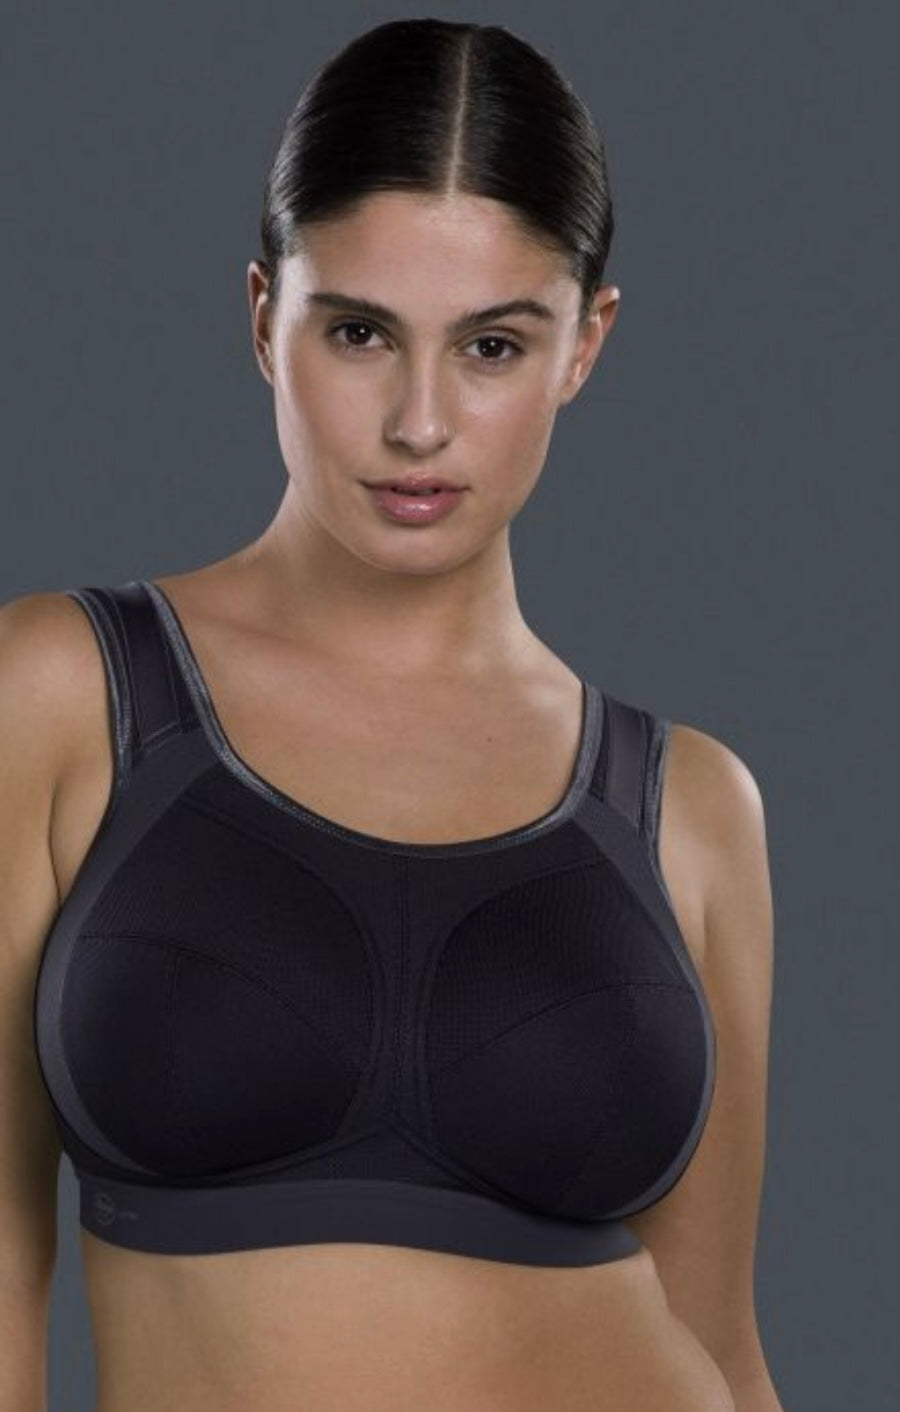 Extreme Control Plus-5567 Sports Bra -Black/Anthracite – The Full Cup